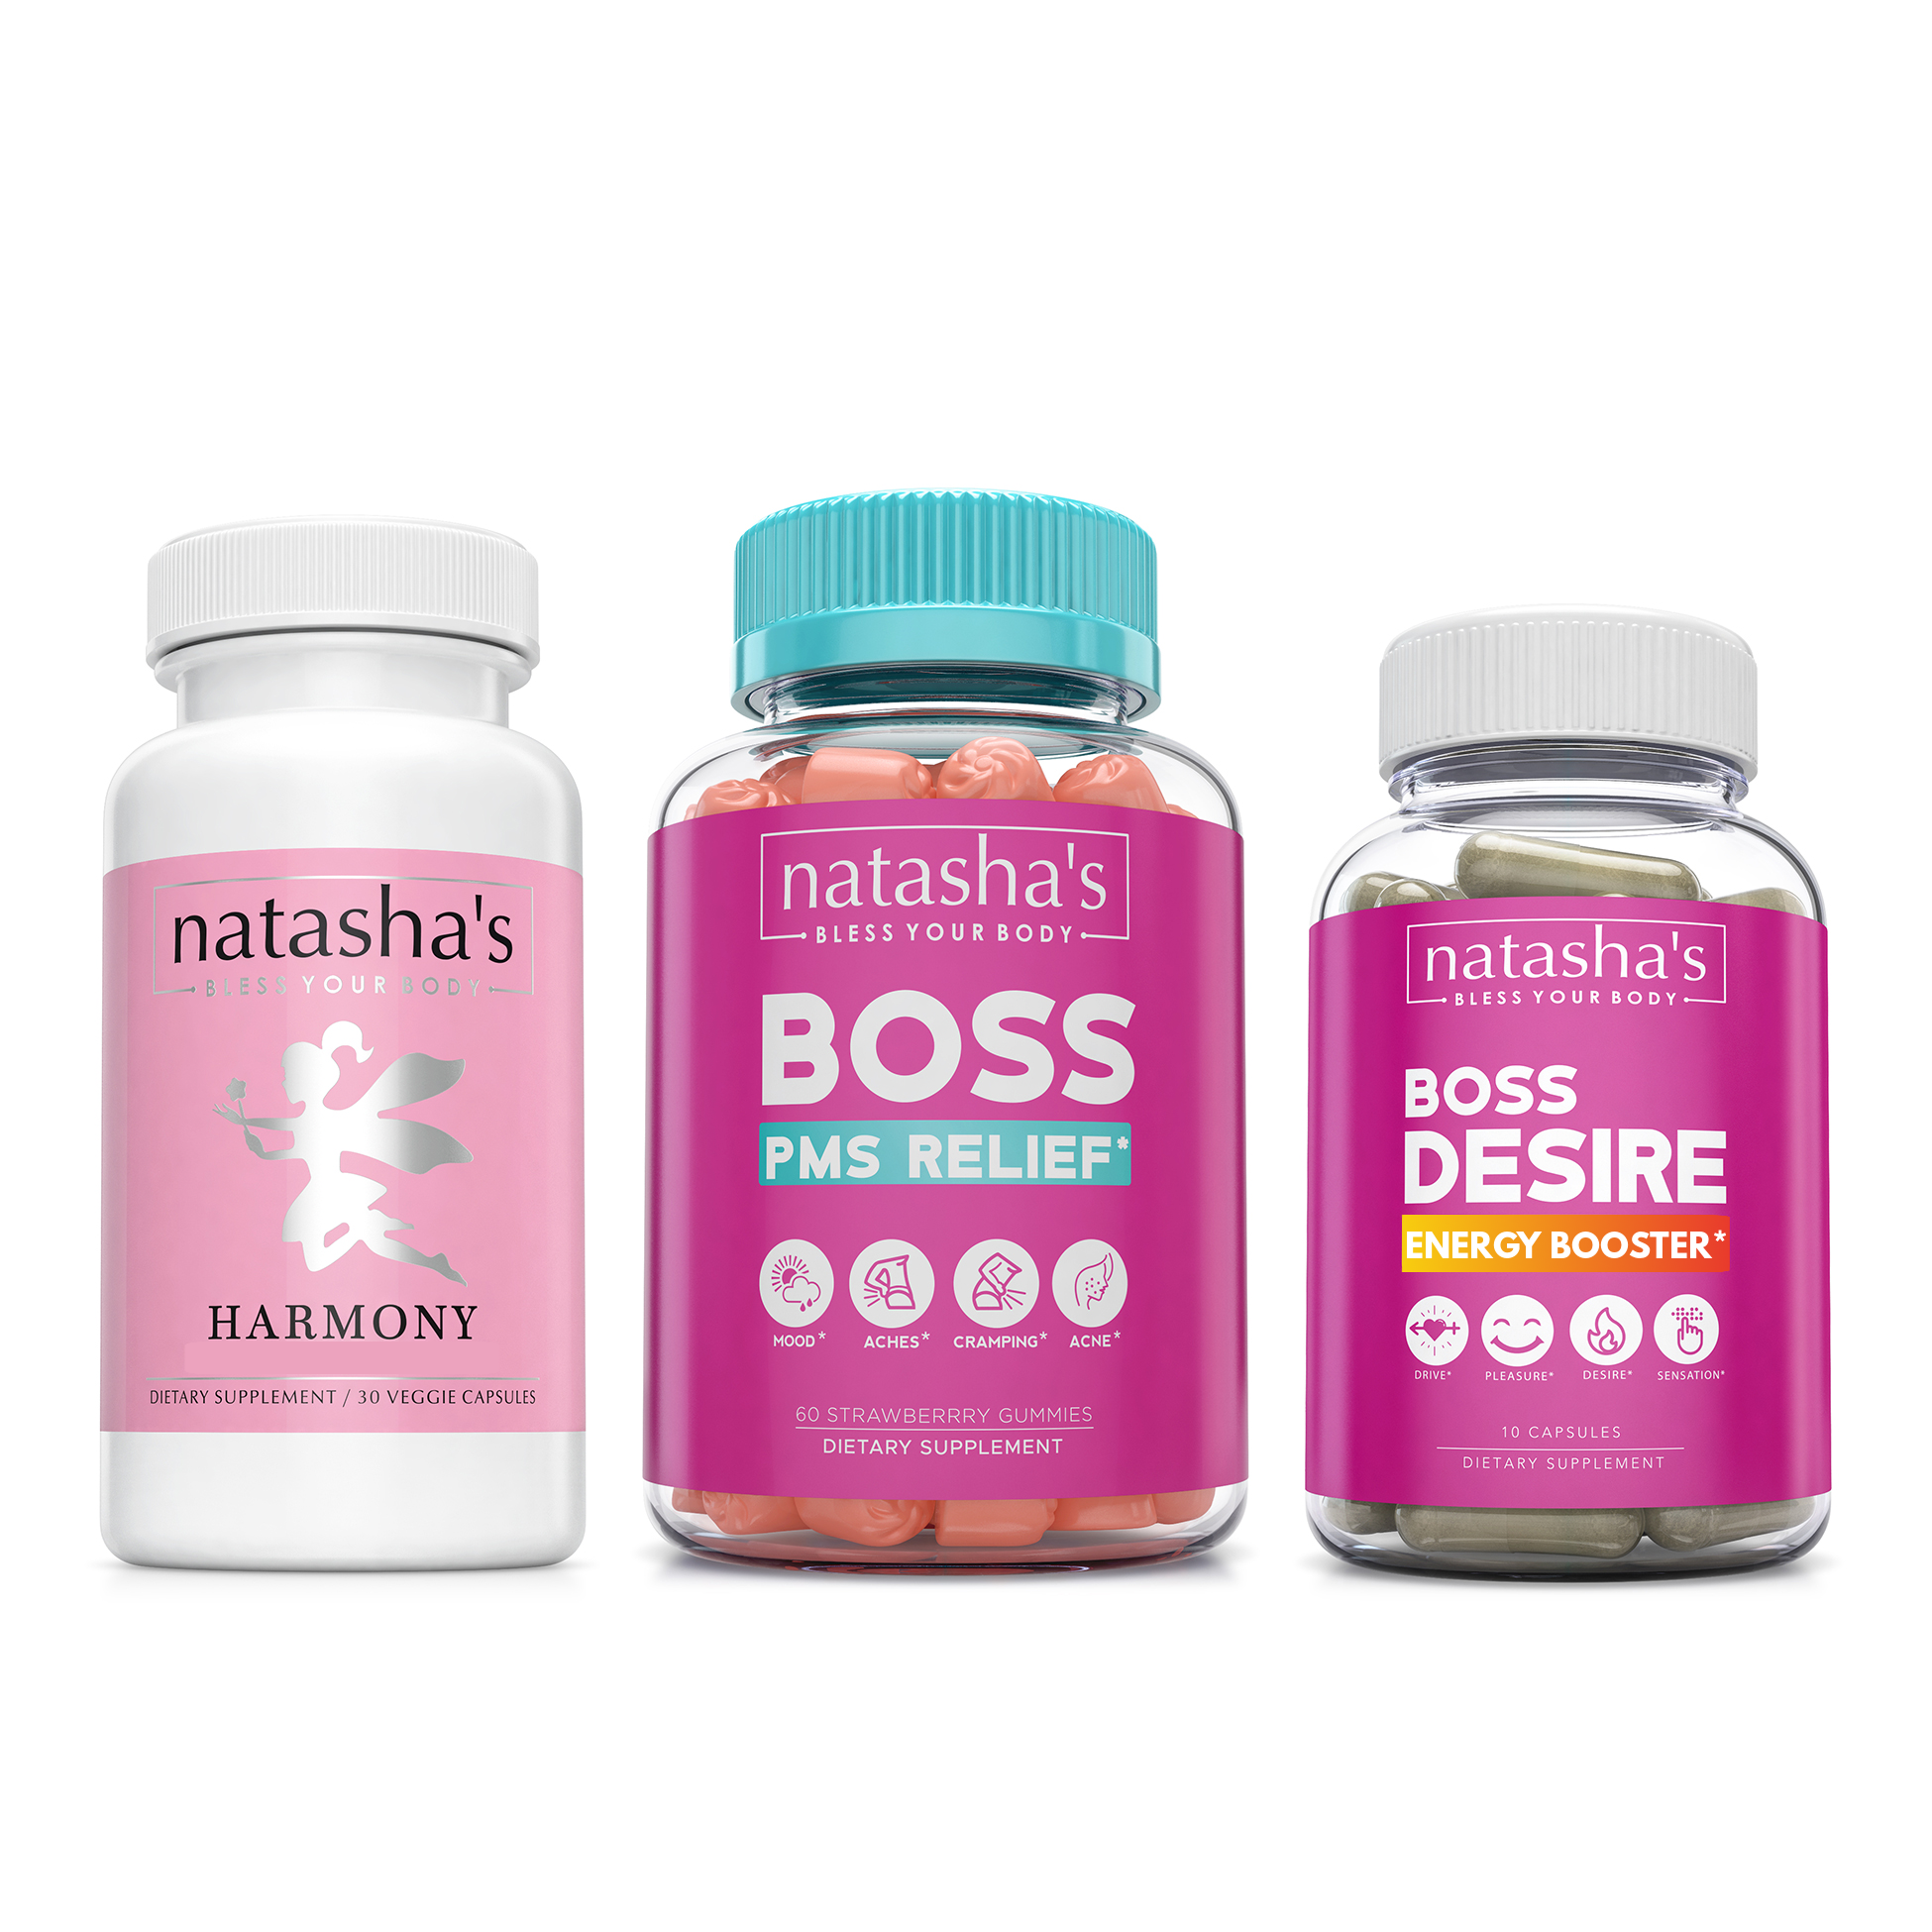 BALANCE STACK - Bundle & Save With Harmony, Boss PMS Relief, Desire Energy Power Pack.